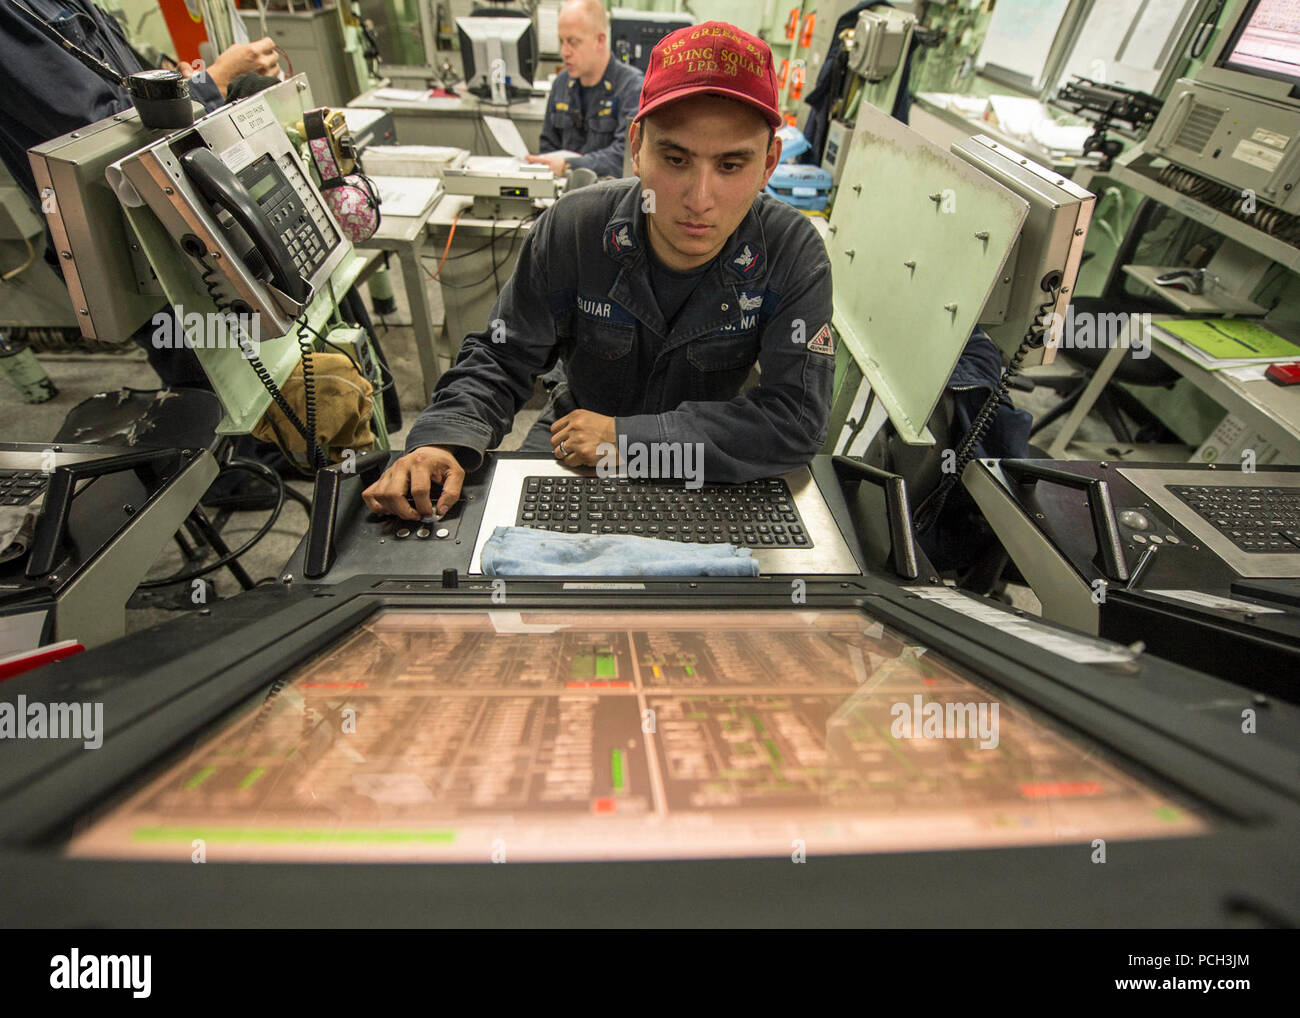 PACIFIC OCEAN (Jan. 30, 2015) Hull Maintenance Technician 3rd Class Luis Aguiar mans a engineering control station console in the central control station aboard the San Antonio-class amphibious transport dock ship USS Green Bay (LPD 20). Green Bay is transiting to Sasebo, Japan, to join the U.S. 7th Fleet's forward deployed Naval forces. Green Bay is replacing the decommissioned Austin-class amphibious transport dock ship USS Denver (LPD 9), previously forward-deployed to Sasebo, and will enhance amphibious presence in the U.S. 7th Fleet as part of the U.S. Navy's long-range plan to send the m Stock Photo